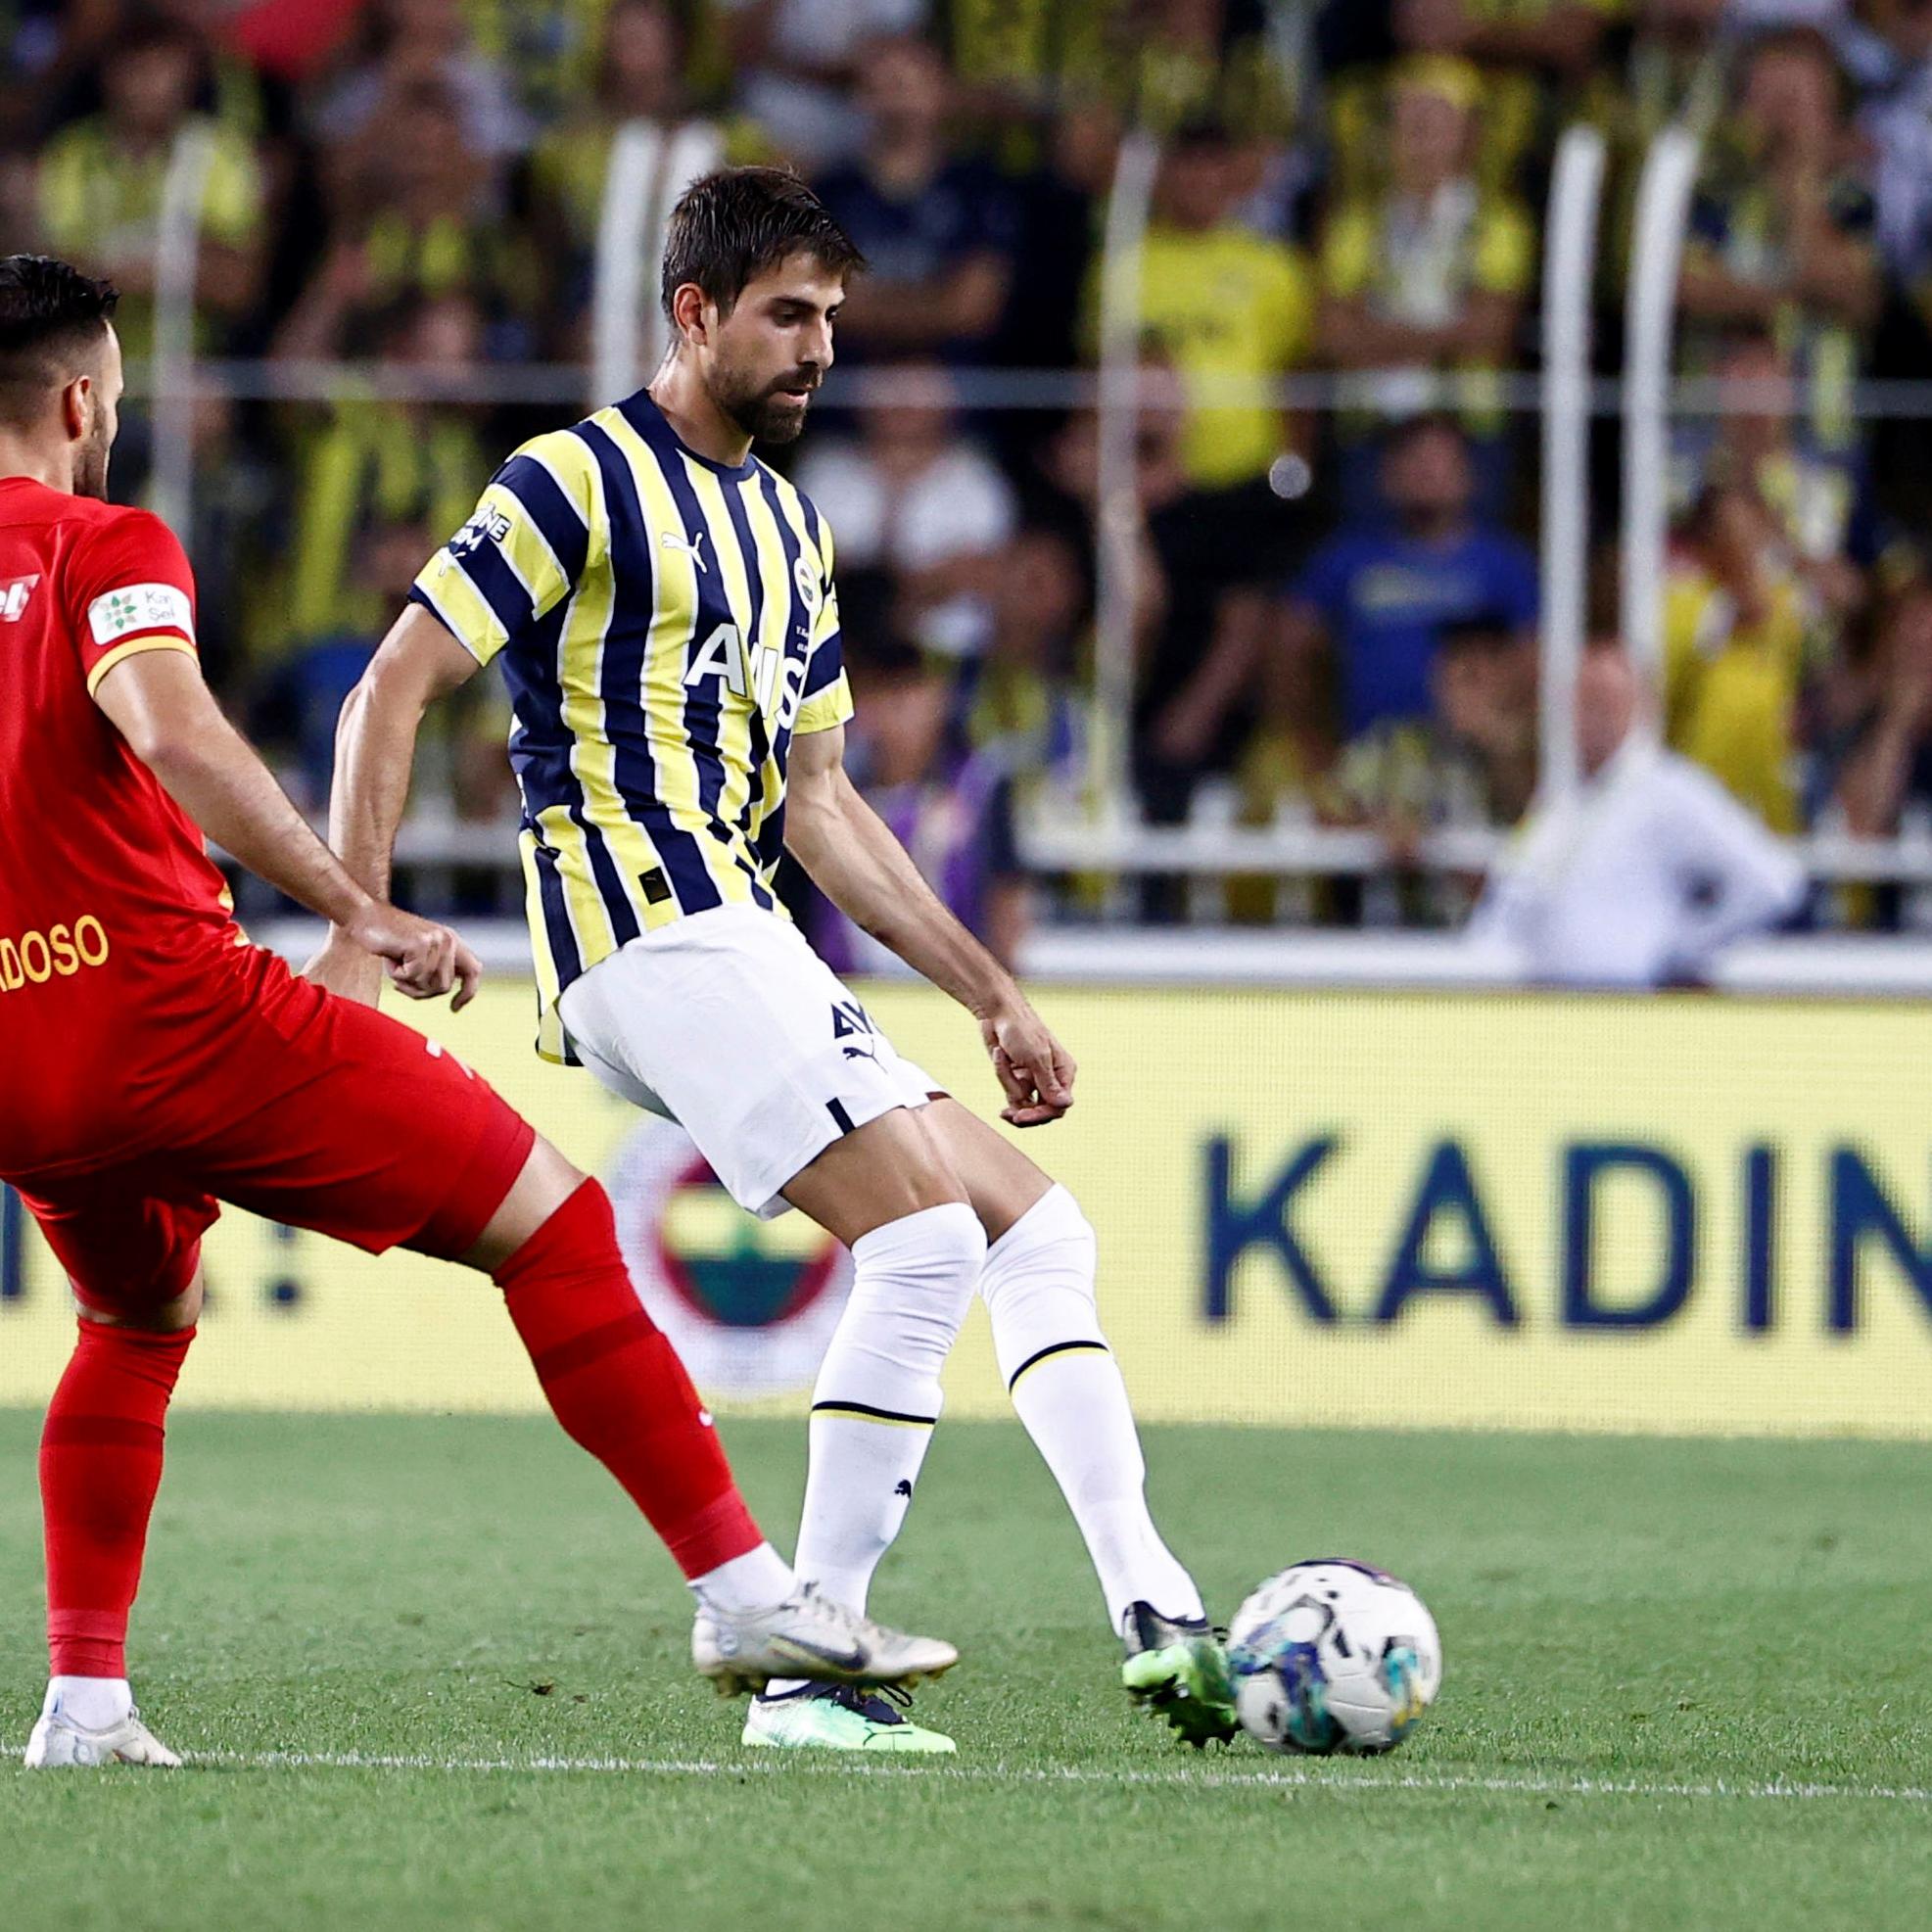 Fenerbahce FC: A Football Club Steeped in Turkish Tradition